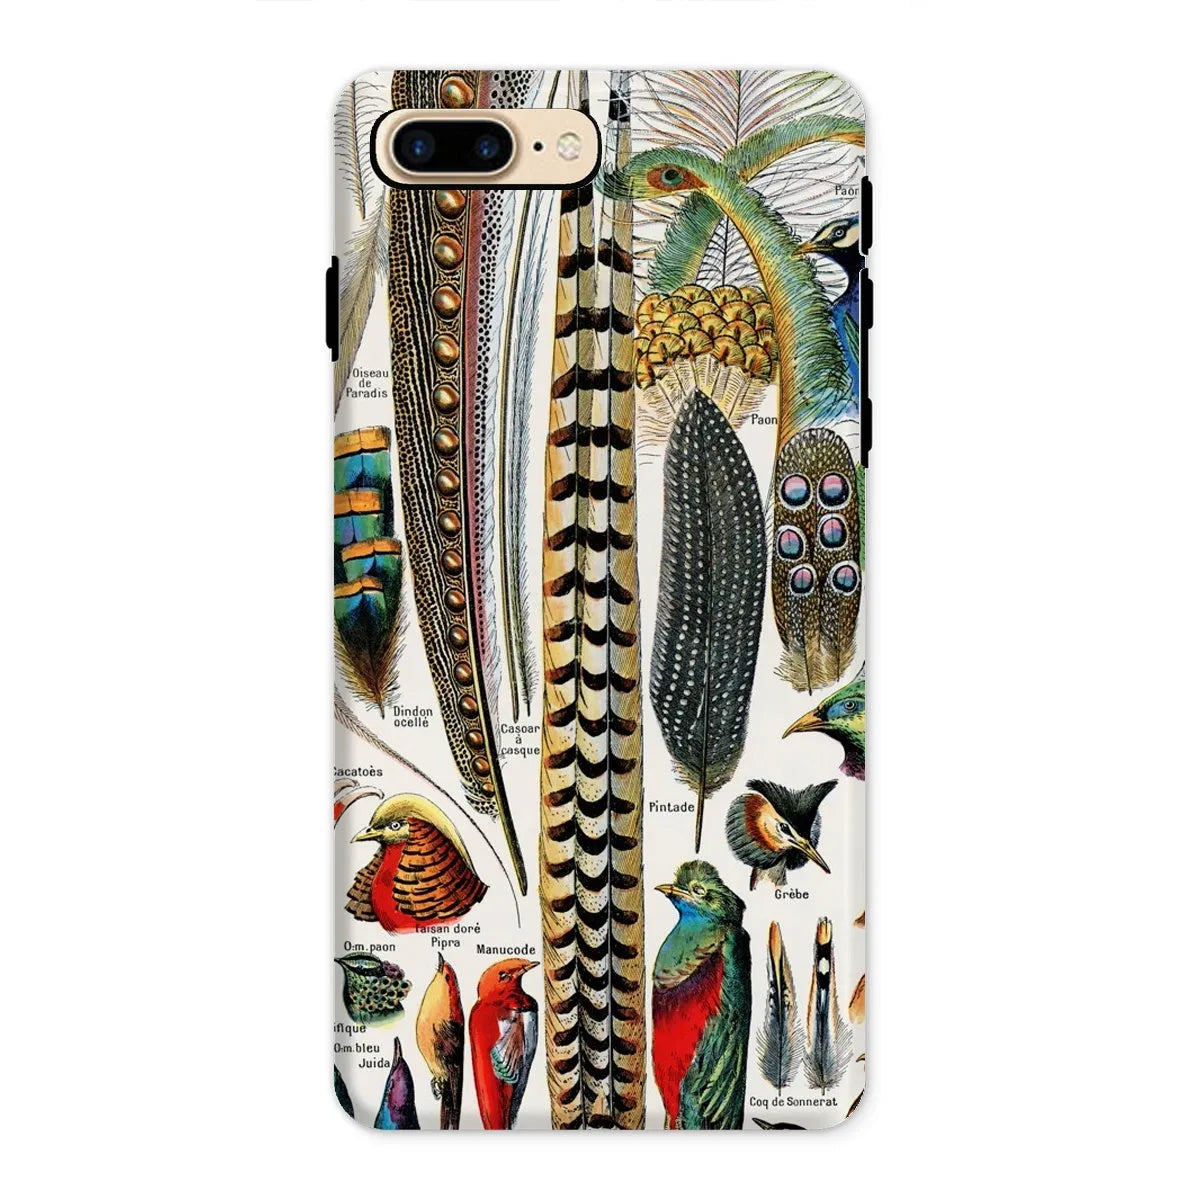 Plumes - Feathers By Adolphe Millot Tough Phone Case - Iphone 8 Plus / Matte - Aesthetic Art